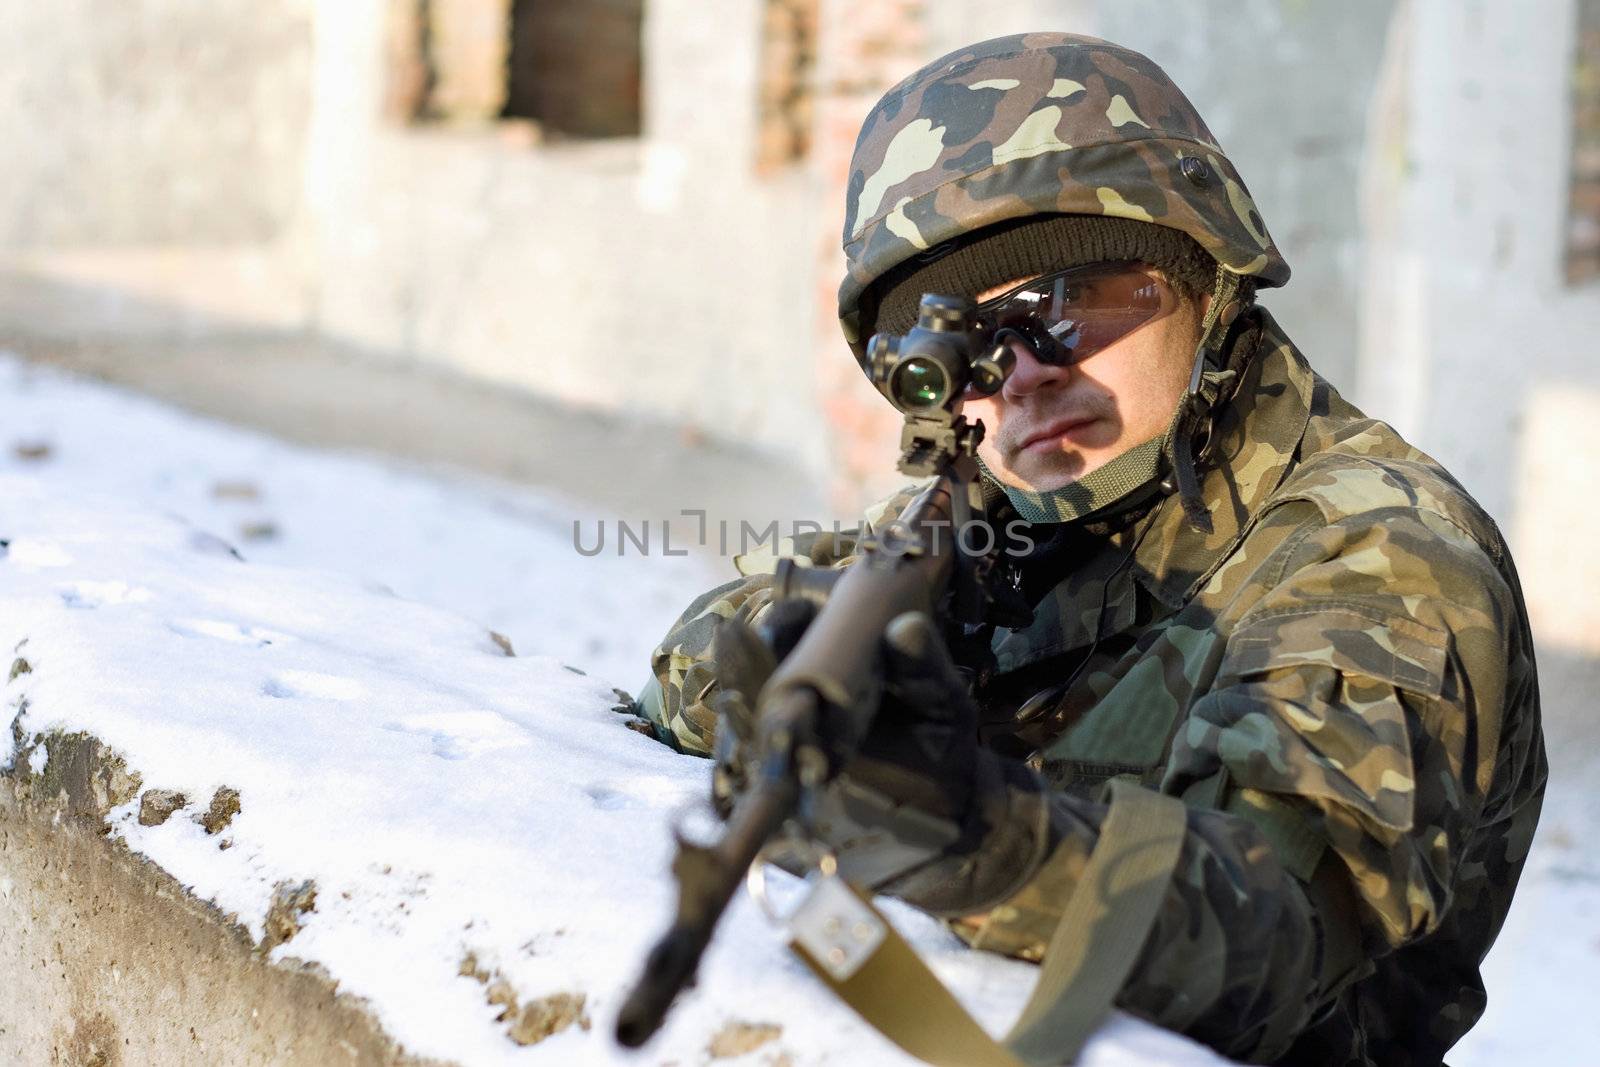 Soldier who aim at his victim from the ambush